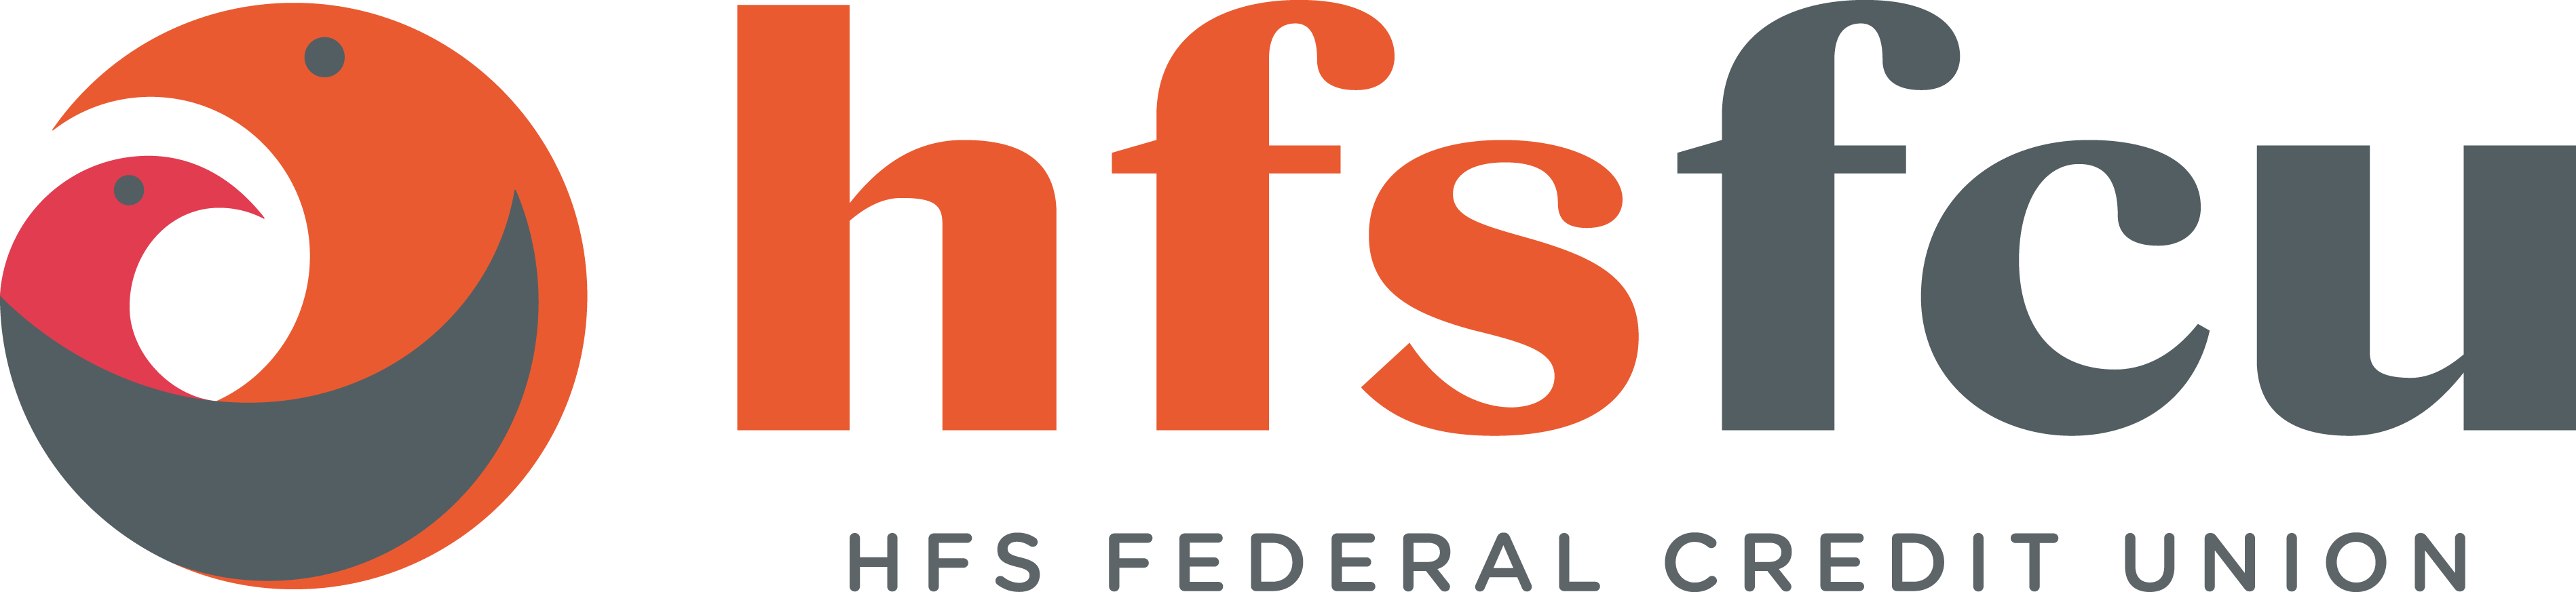 3. HFS Federal Credit Union (Tier 3)